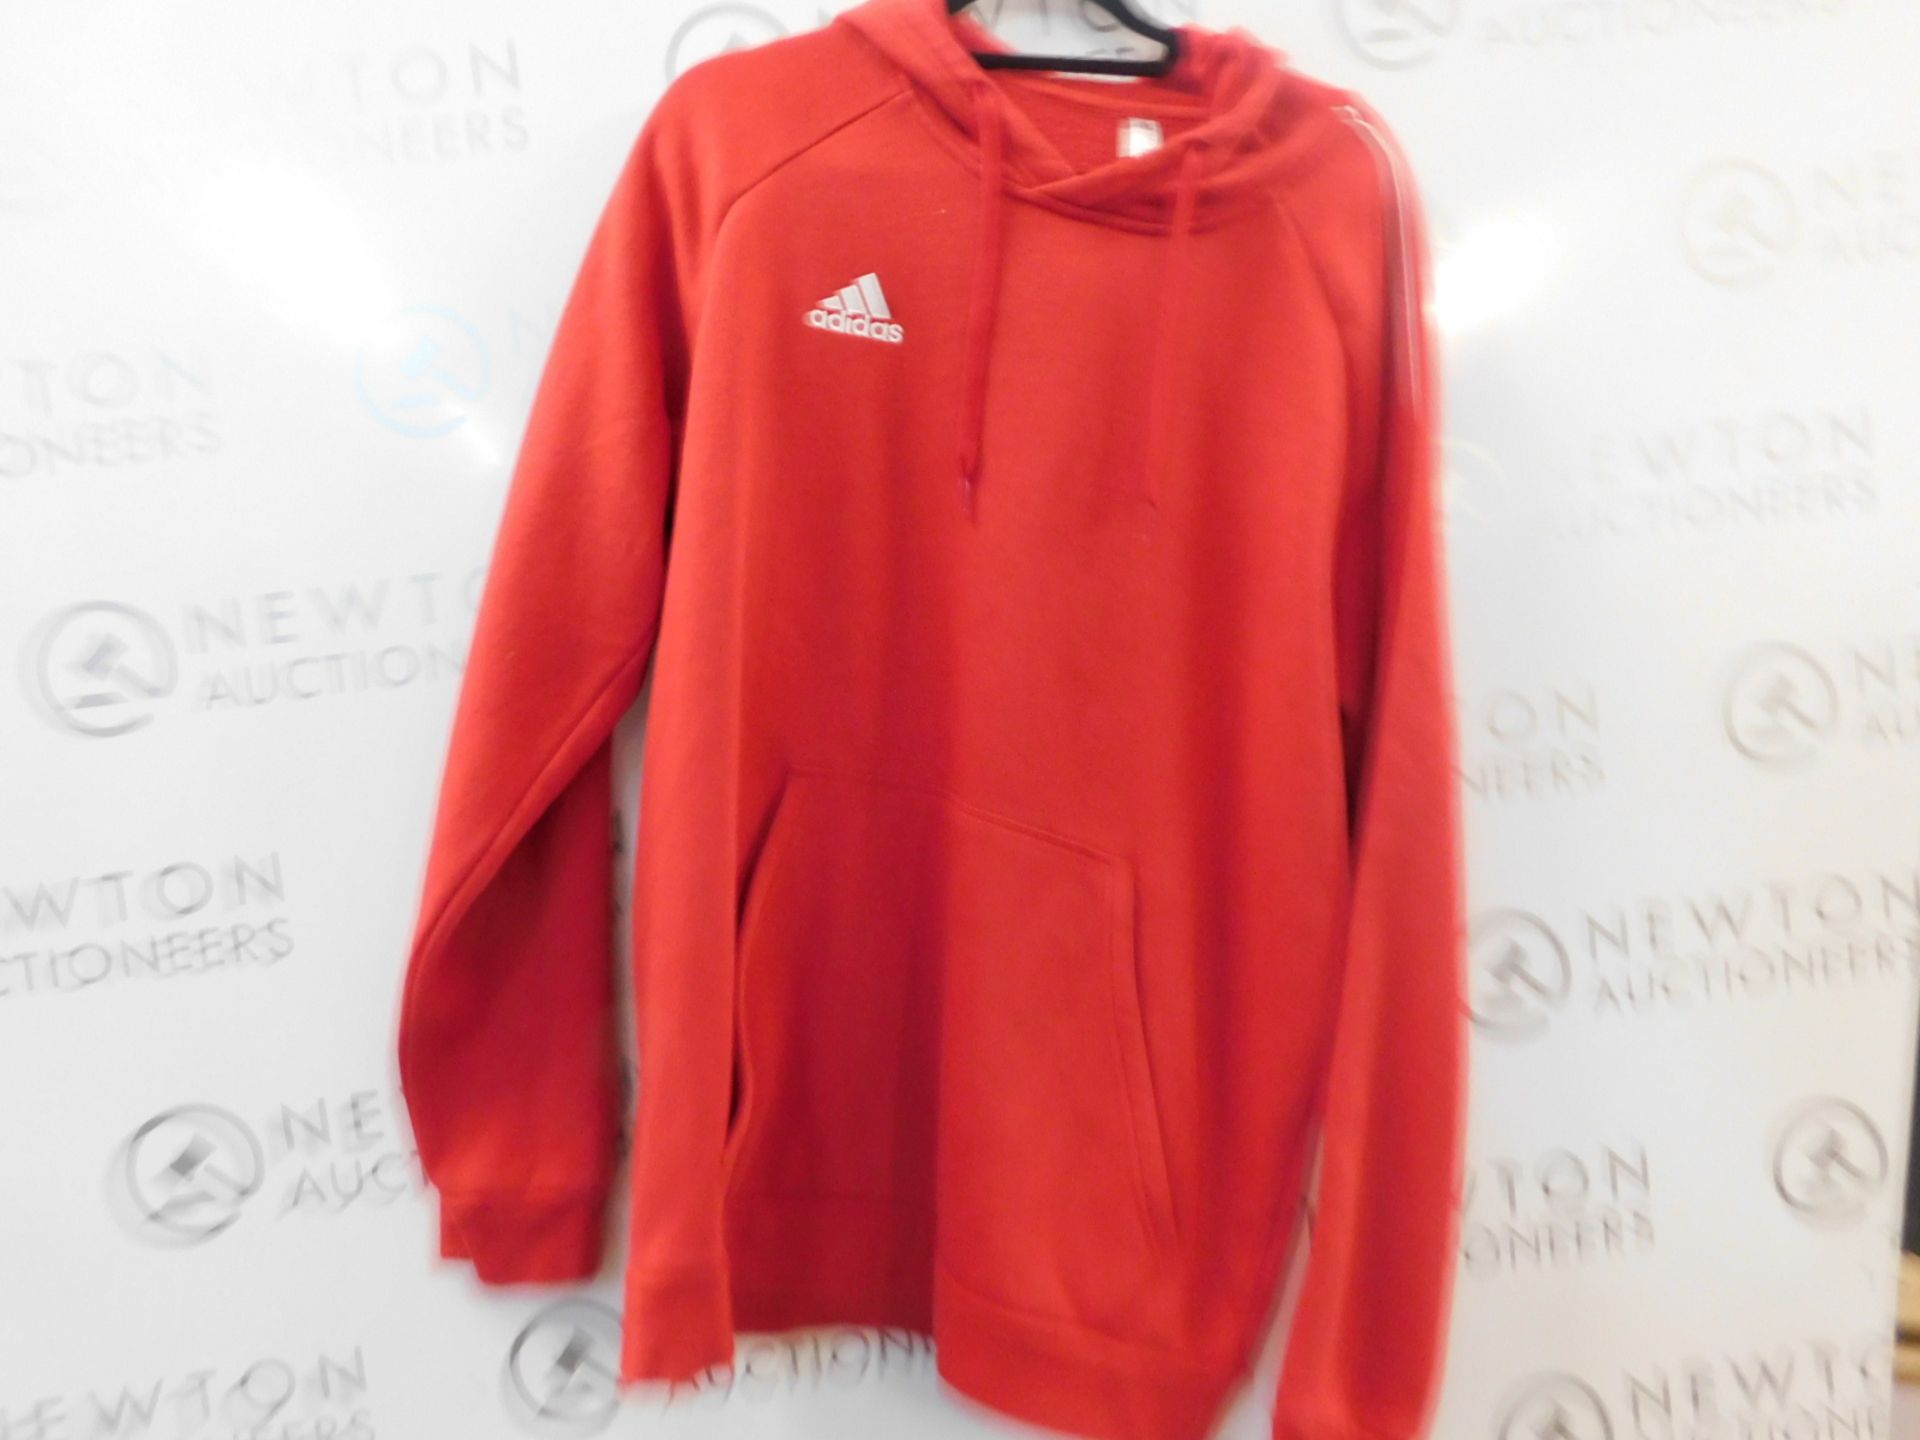 1 ADIDAS MENS CORE 18 POWER RED HOODIE SIZE XL RRP Â£44.99